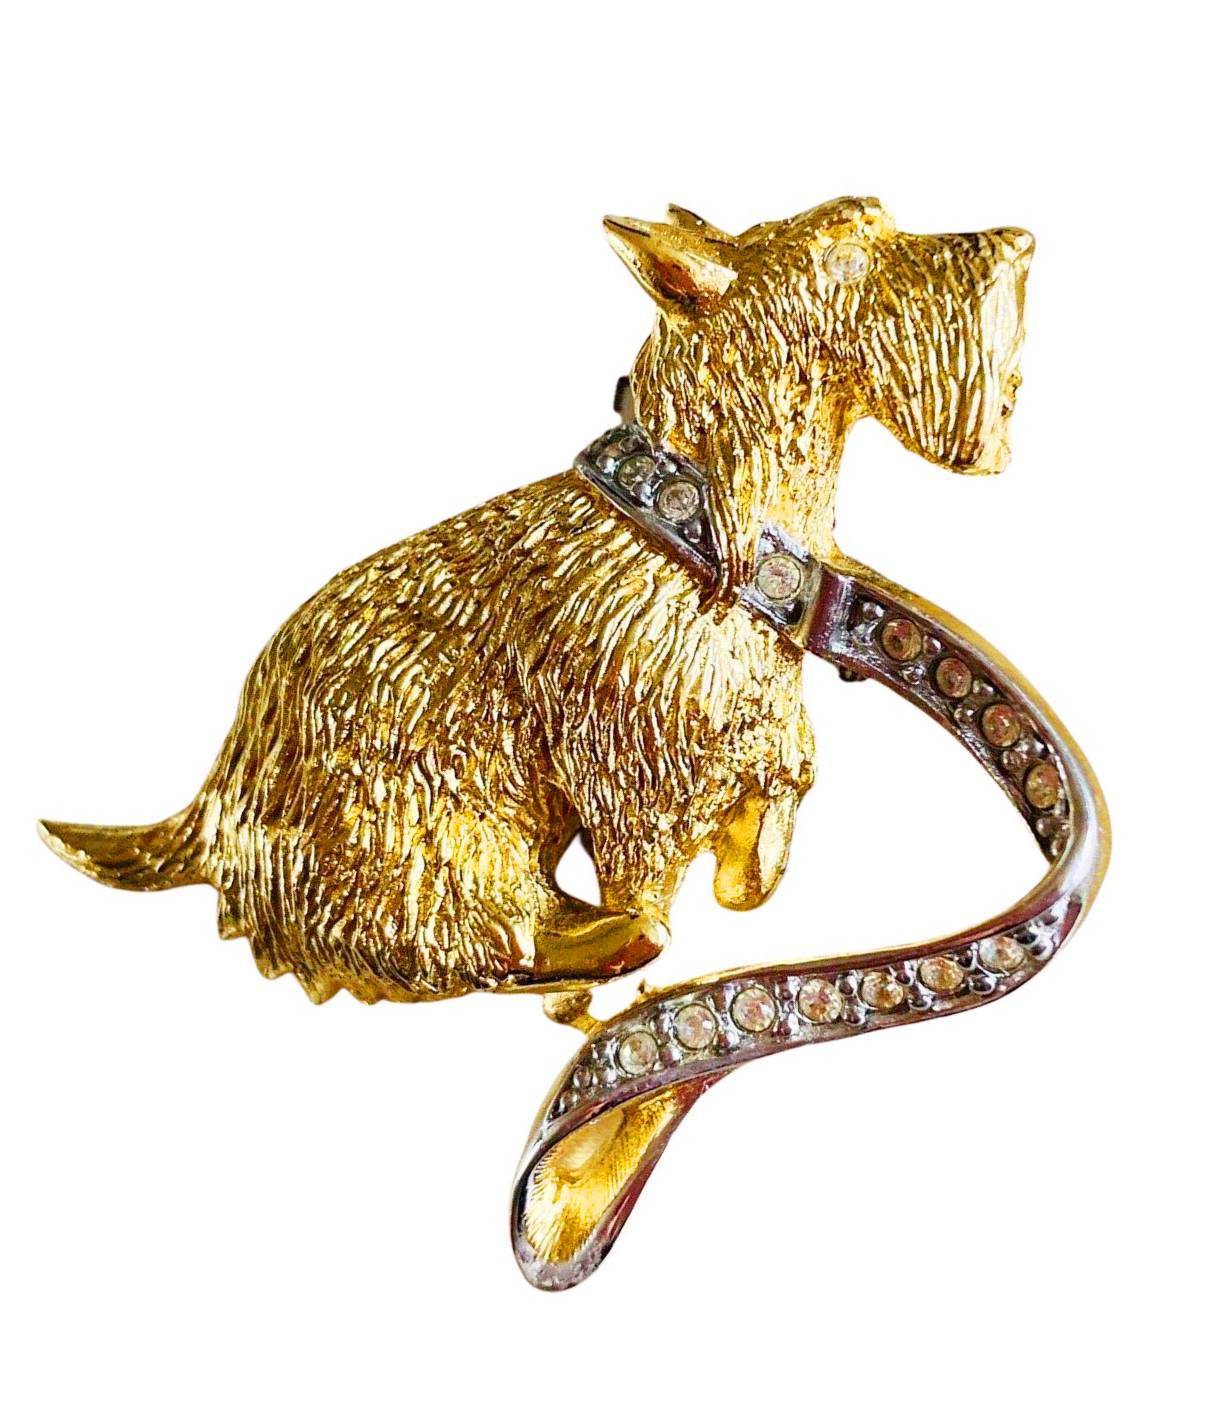 1980s Burberrys Terrier Dog Gold Plated Brooch with Crystals - style - CHNGR